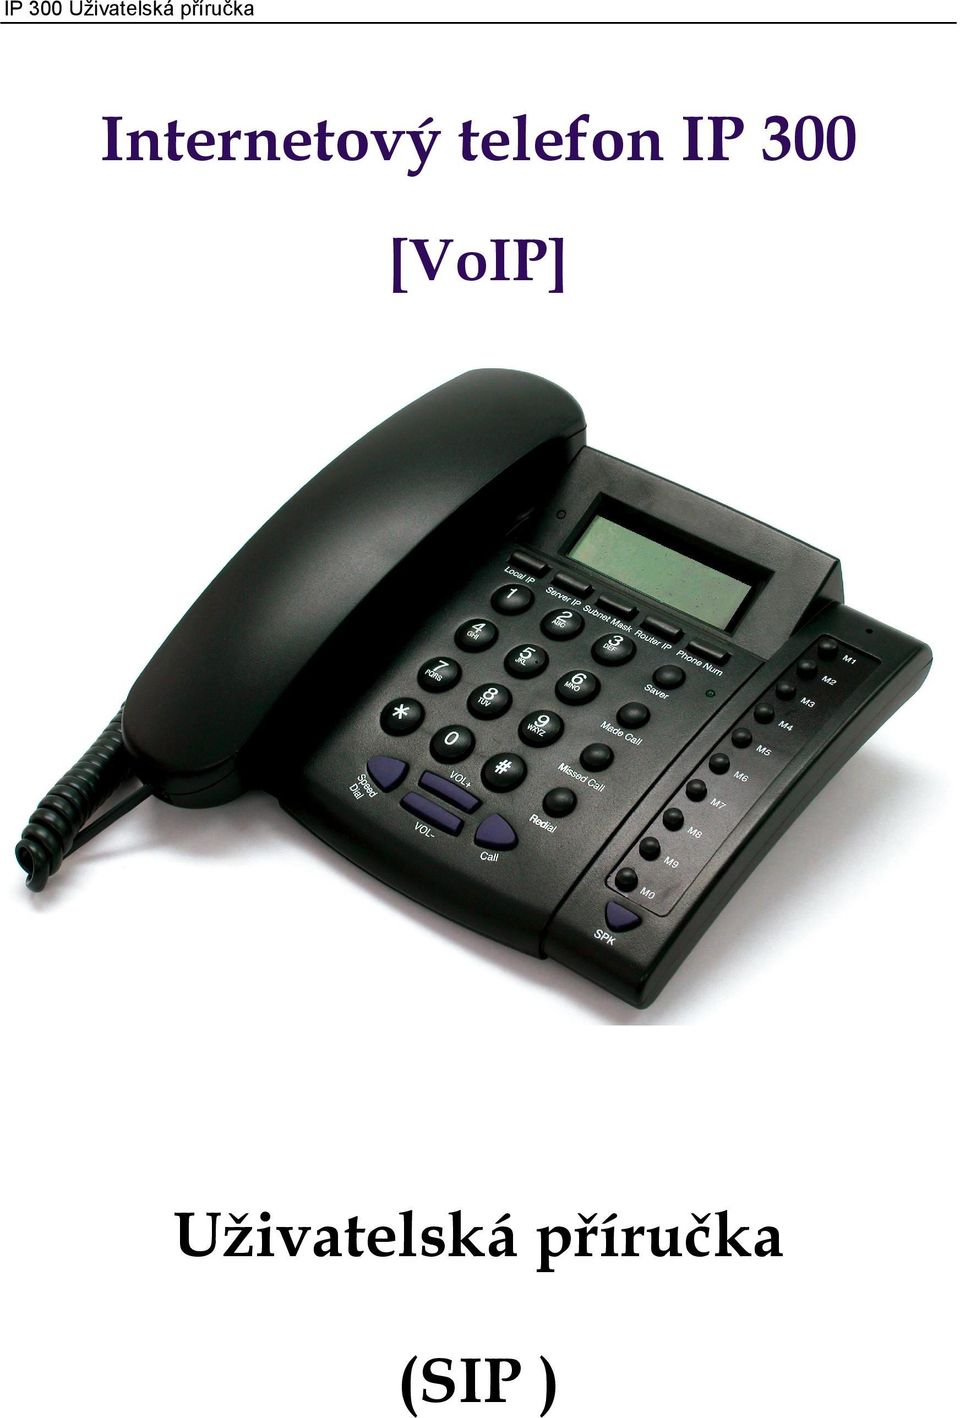 [VoIP]